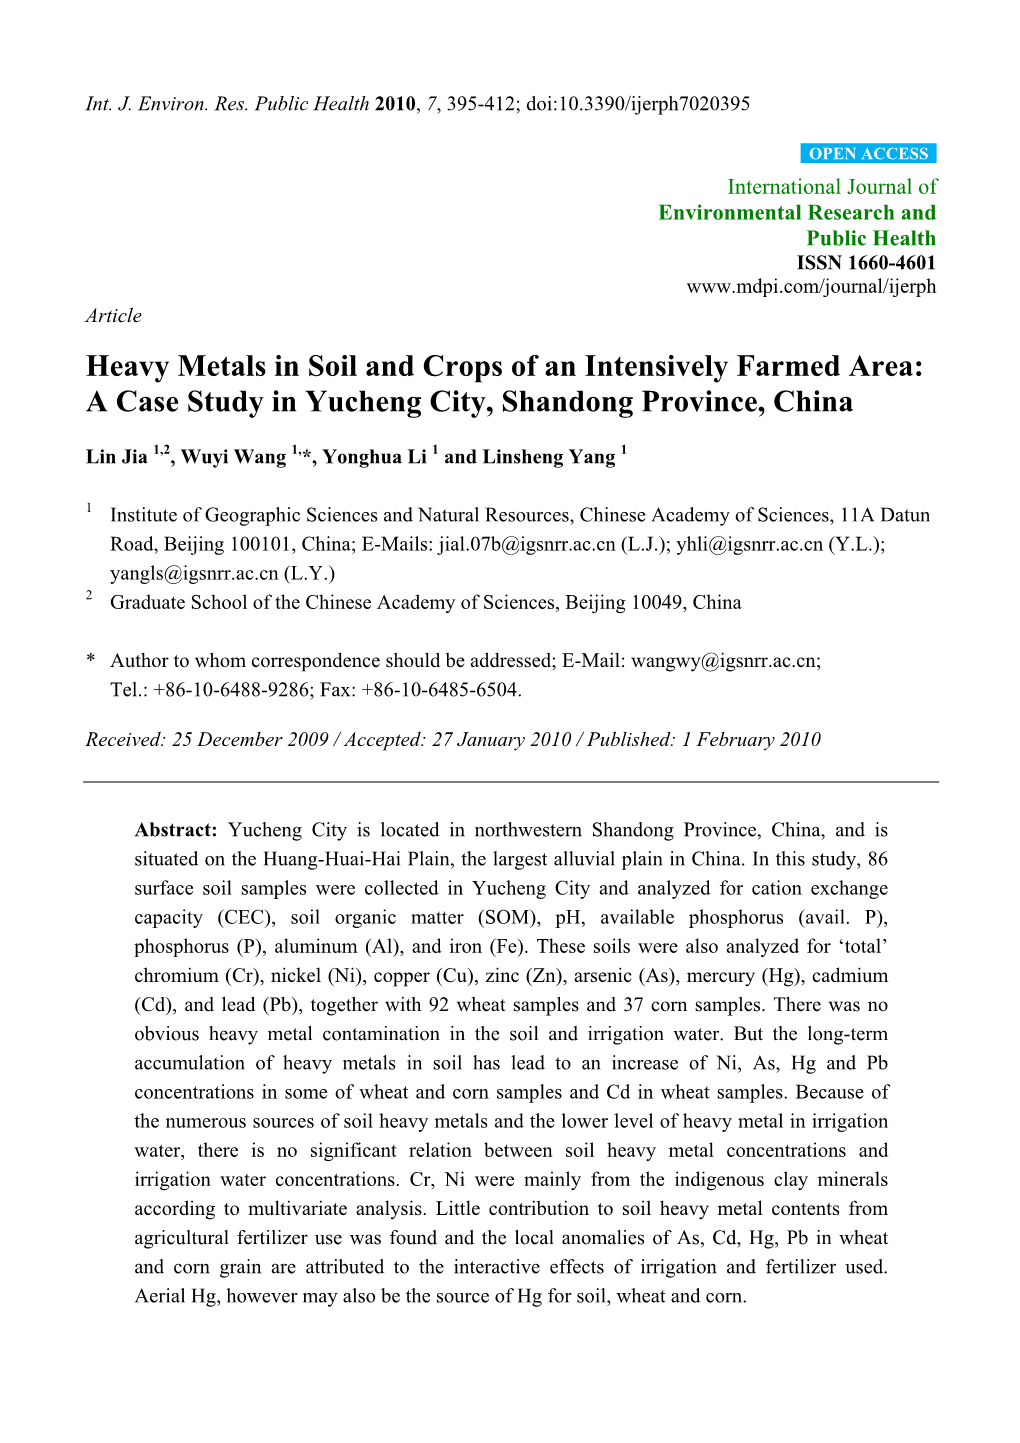 Heavy Metals in Soil and Crops of an Intensively Farmed Area: a Case Study in Yucheng City, Shandong Province, China